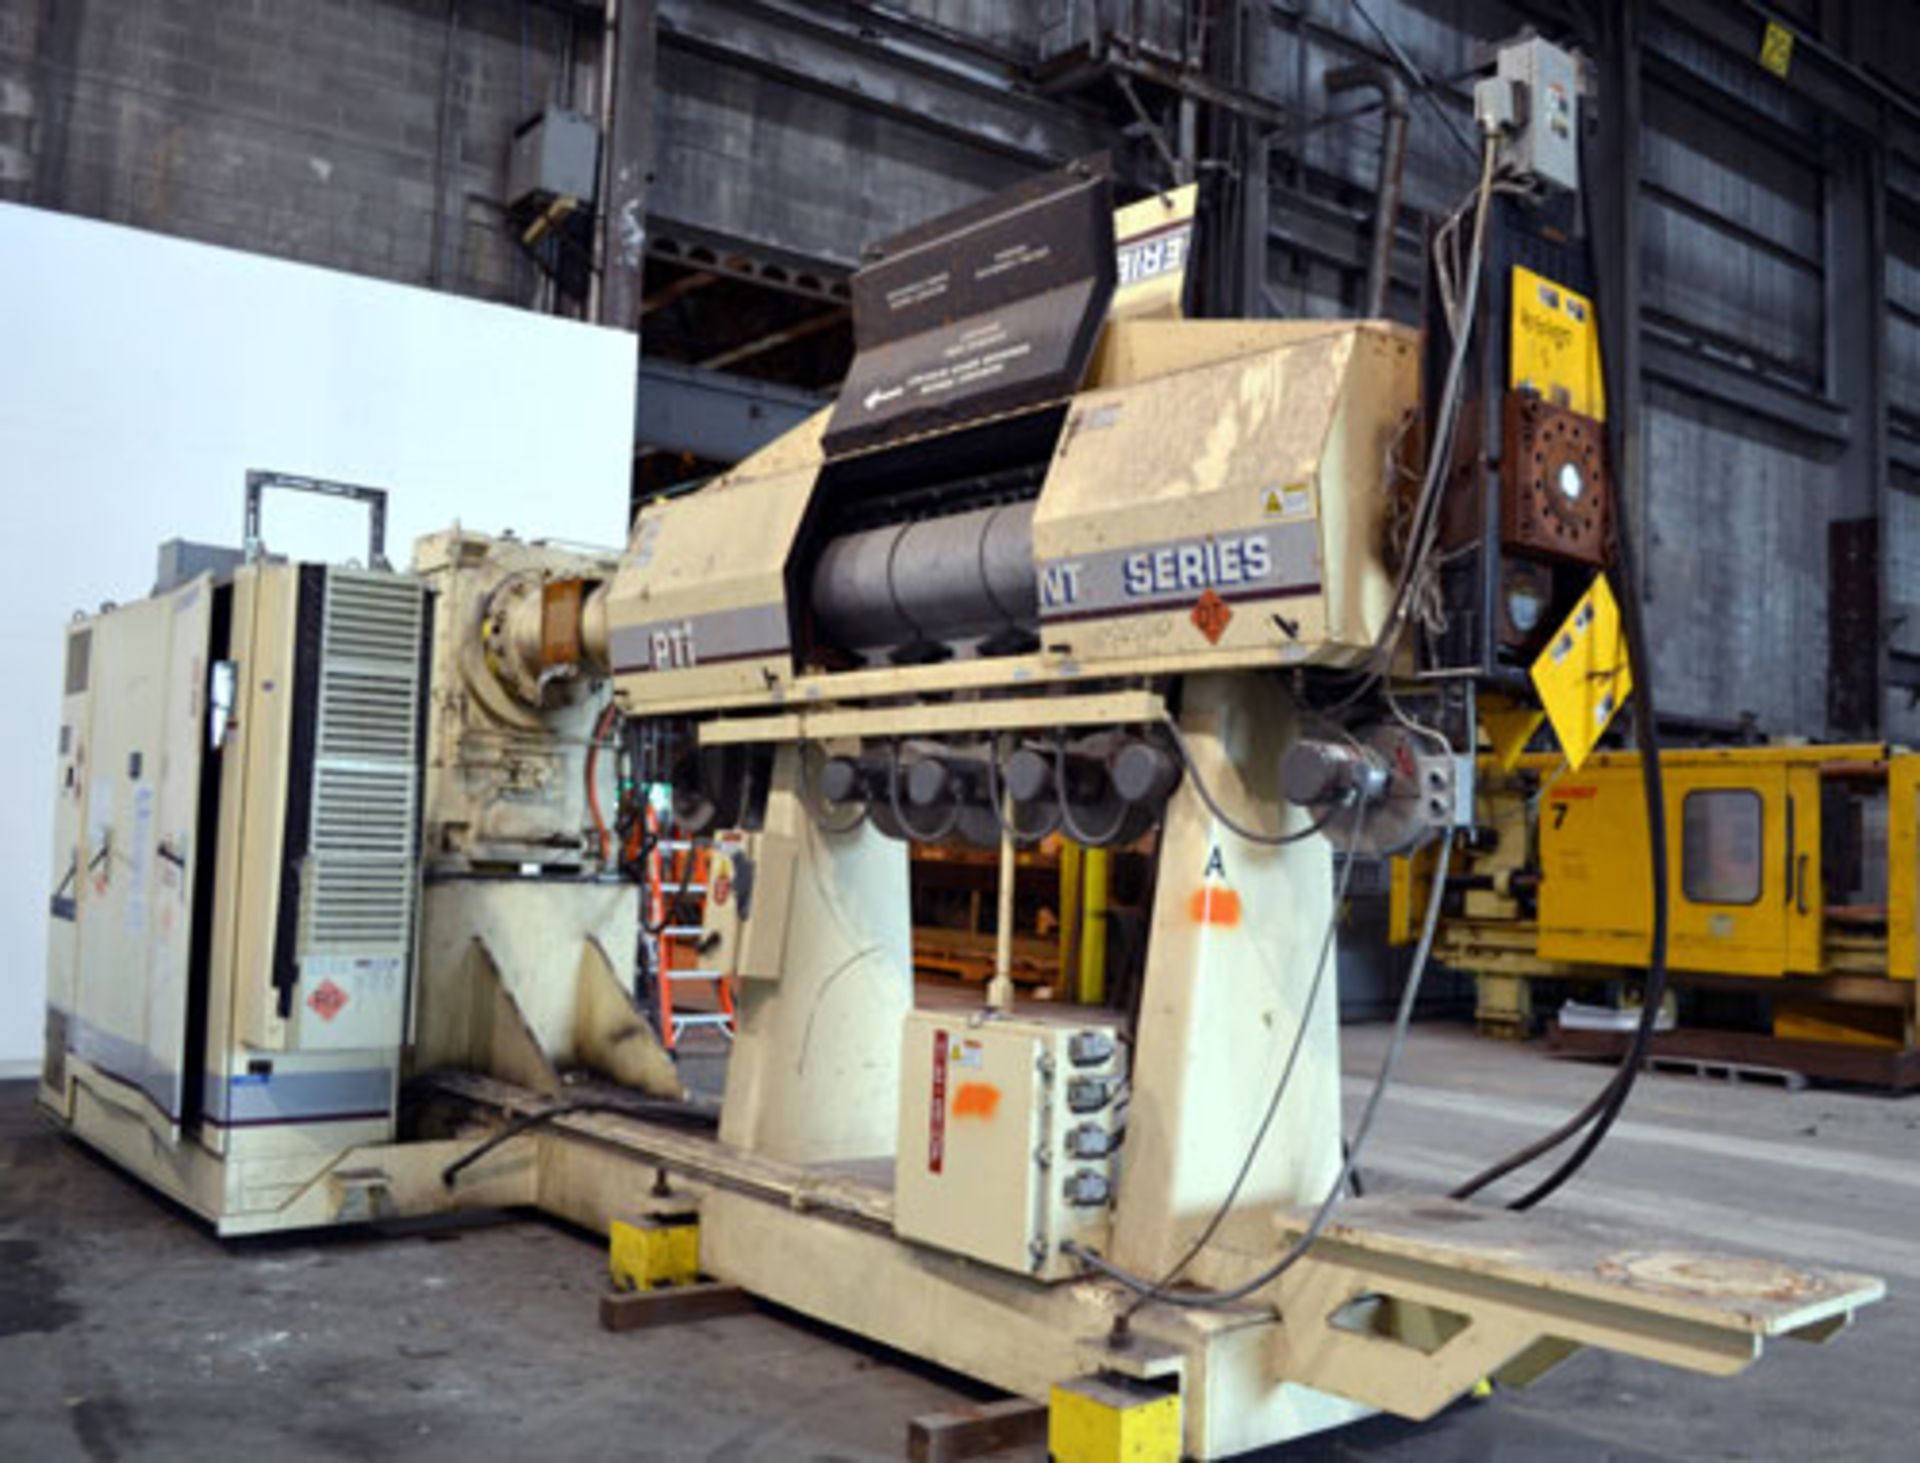 PTI Processing Technologies Model 6000 6"" Trident Series Single Screw Extruder - Image 5 of 22